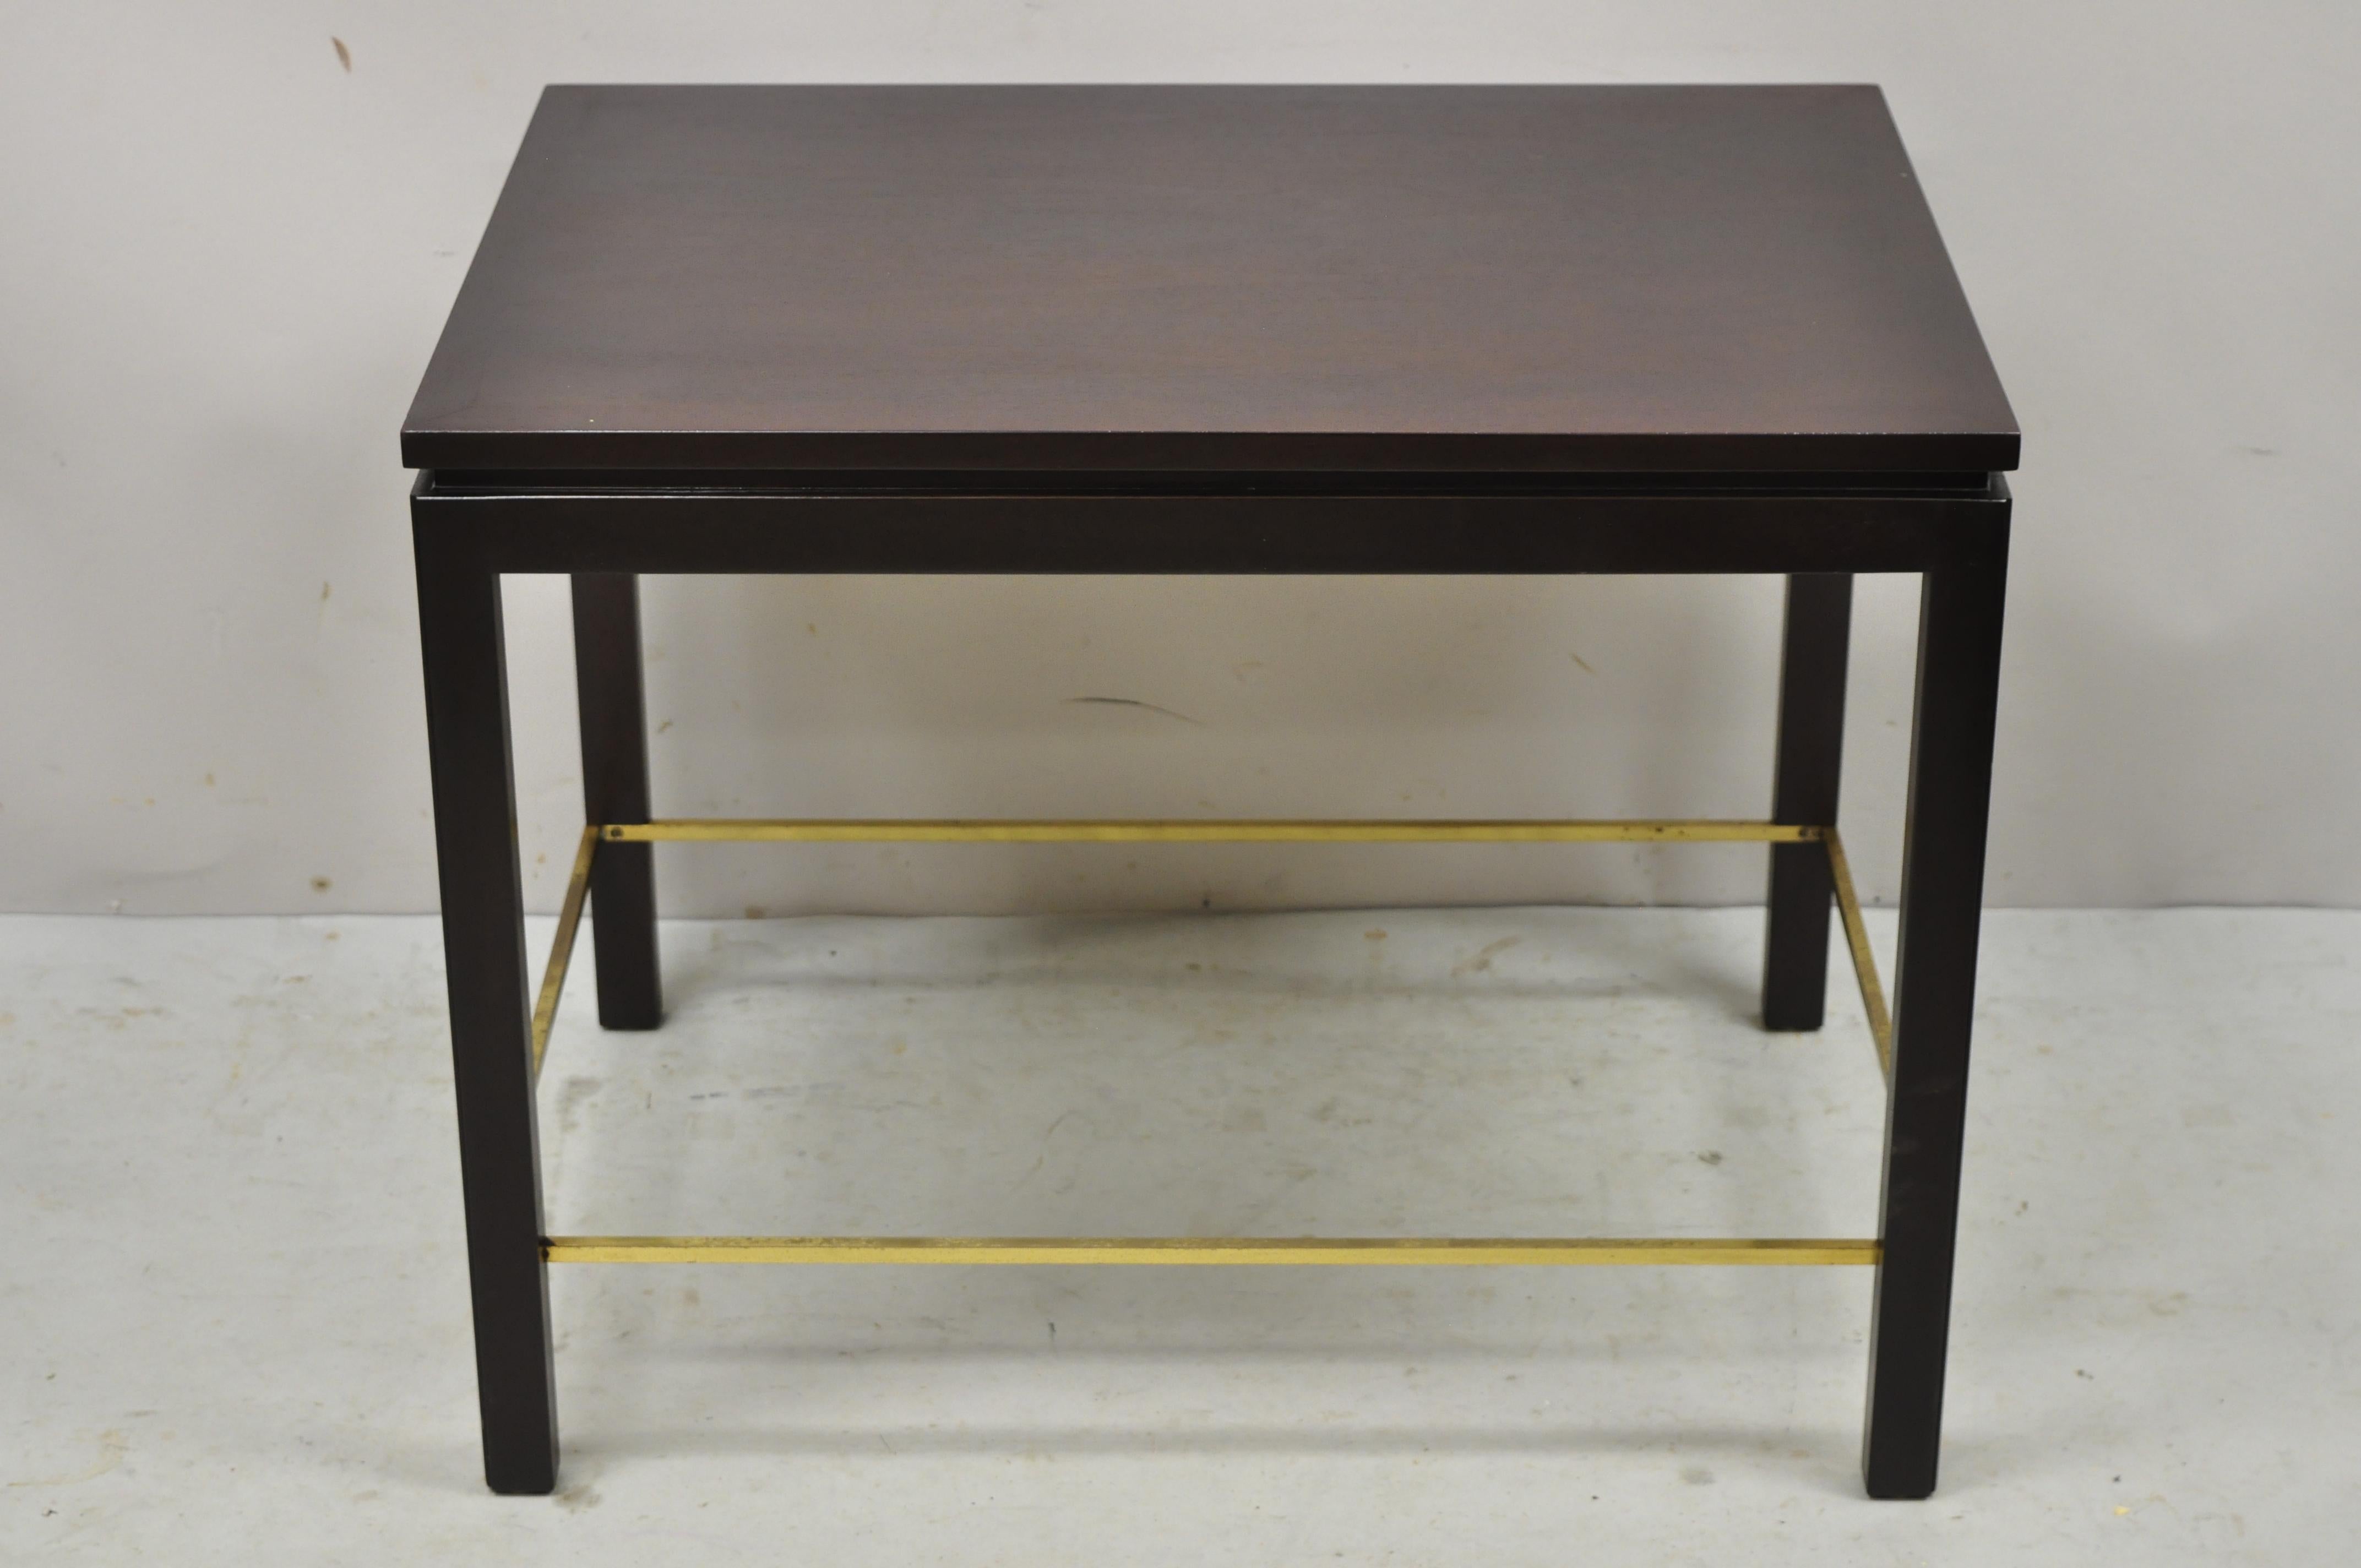 Edward Wormley for Dunbar mahogany side table brass stretcher Mid-Century Modern. Item features beautiful wood grain, brass accents, original label, very nice antique item, clean modernist lines, quality American craftsmanship. Circa 1976.